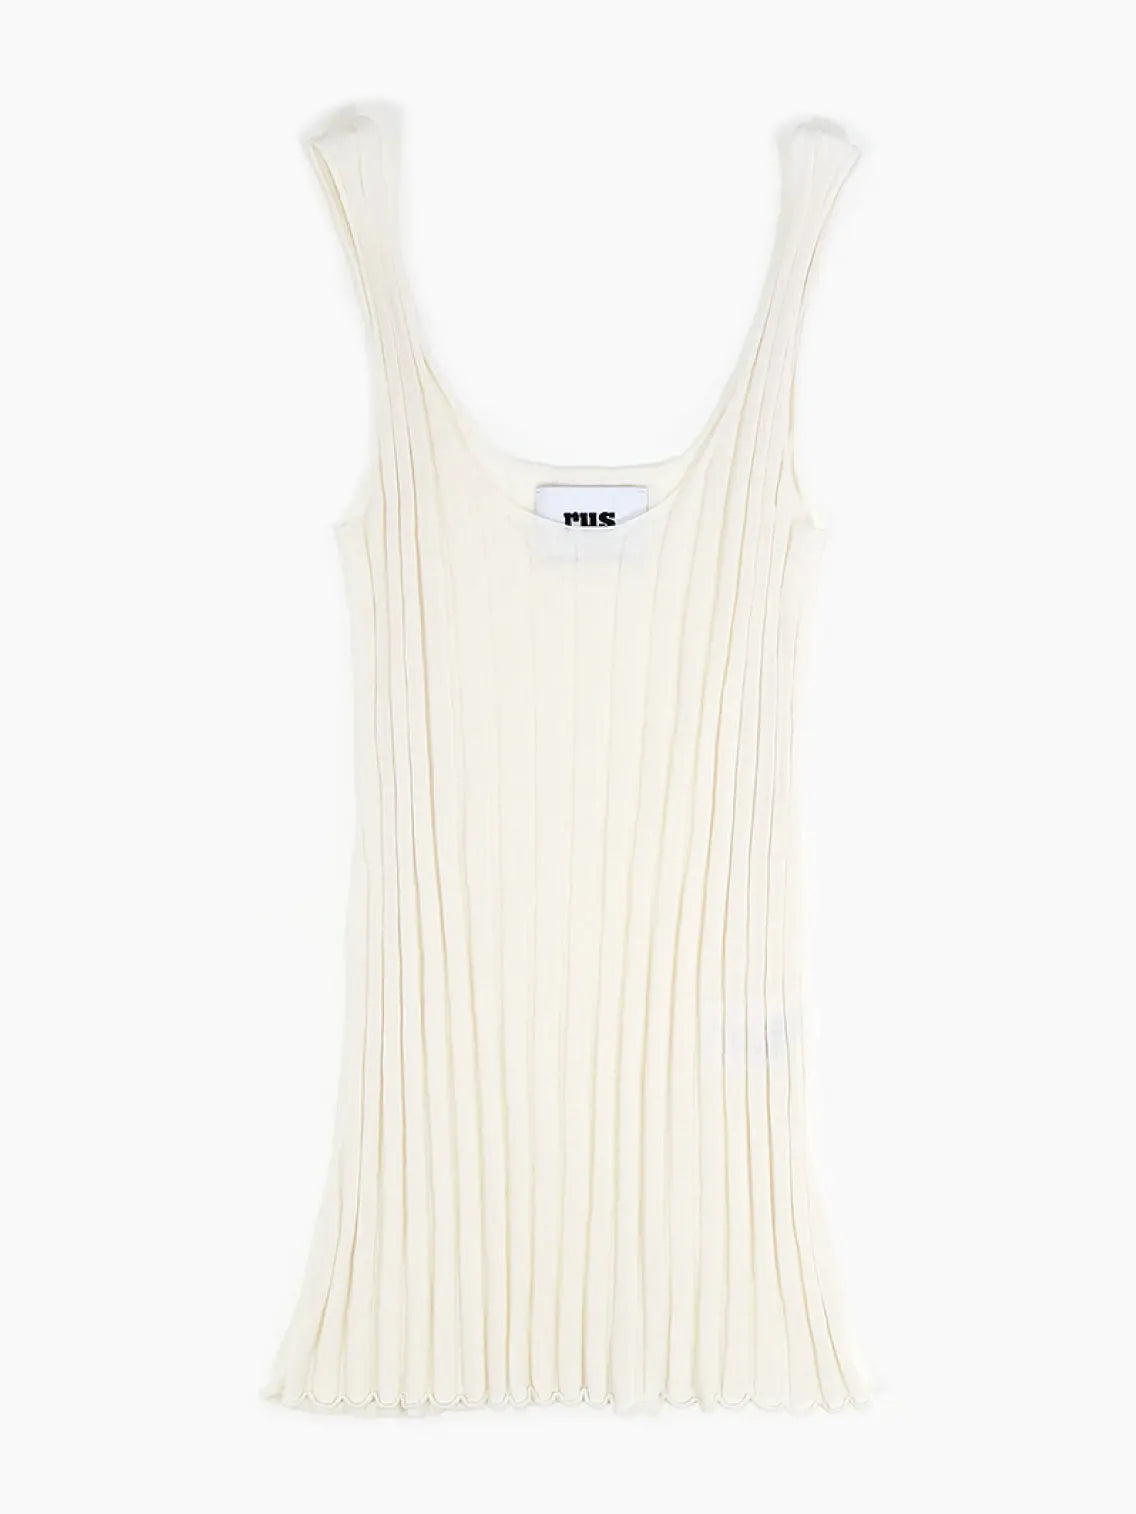 A Stella Top Chalk by Rus, sleeveless, cream-colored, ribbed knit dress with thin straps and a scoop neckline, laid flat on a white background. The dress has a fitted, slightly flared silhouette and features a small white label with black text on the inside of the back neckline. Available exclusively at Bassalstore in Barcelona.